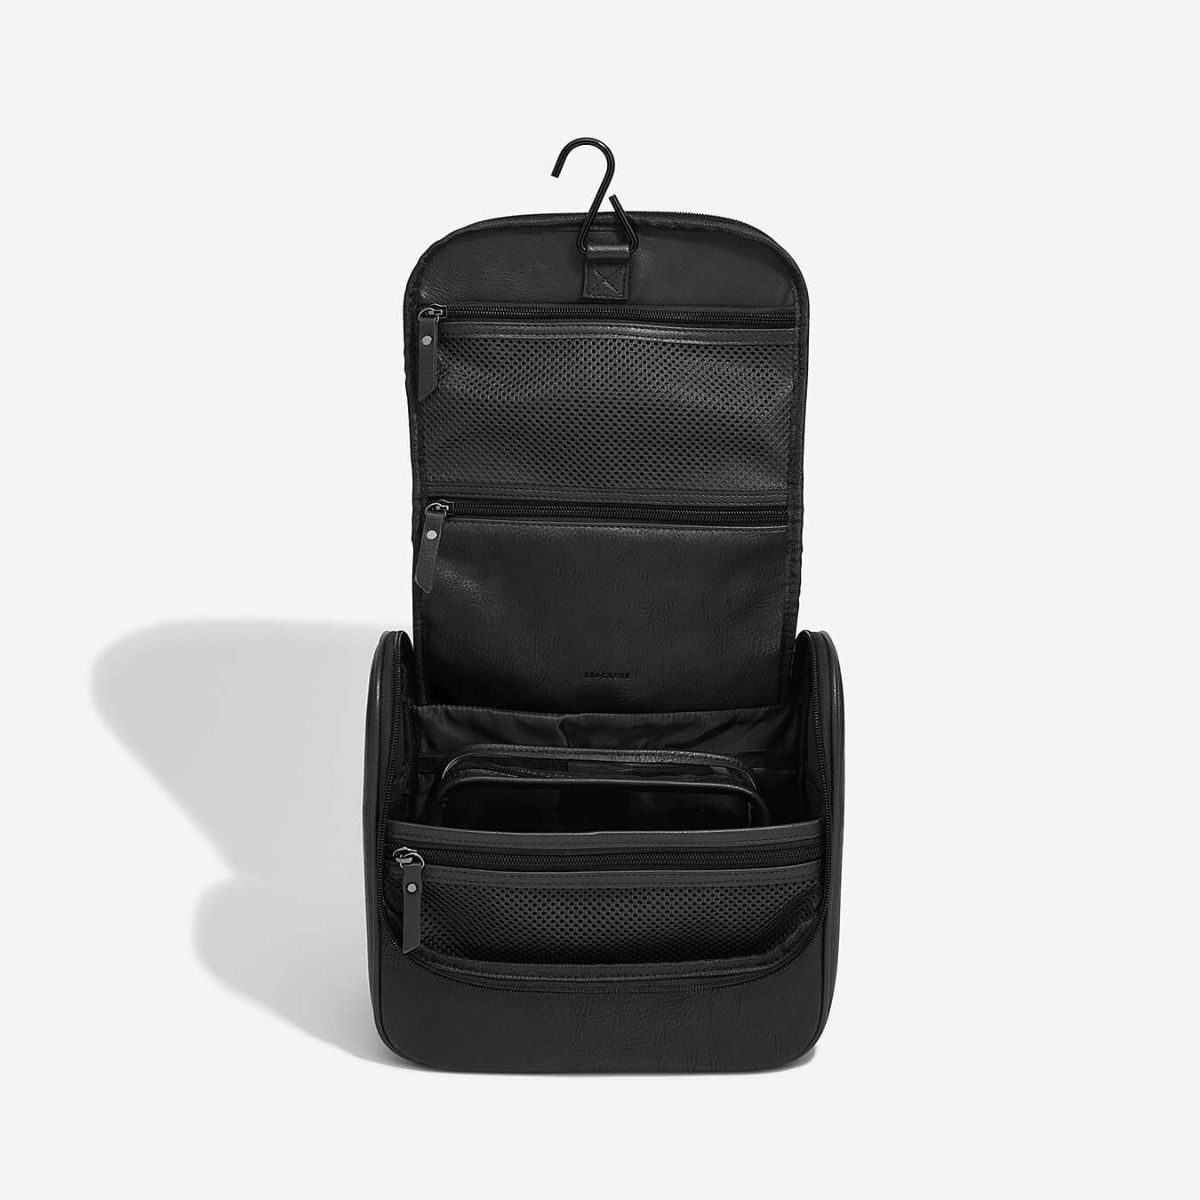 Stackers Men's Hanging Wash Bag - Black - Holiday Accent Ltd